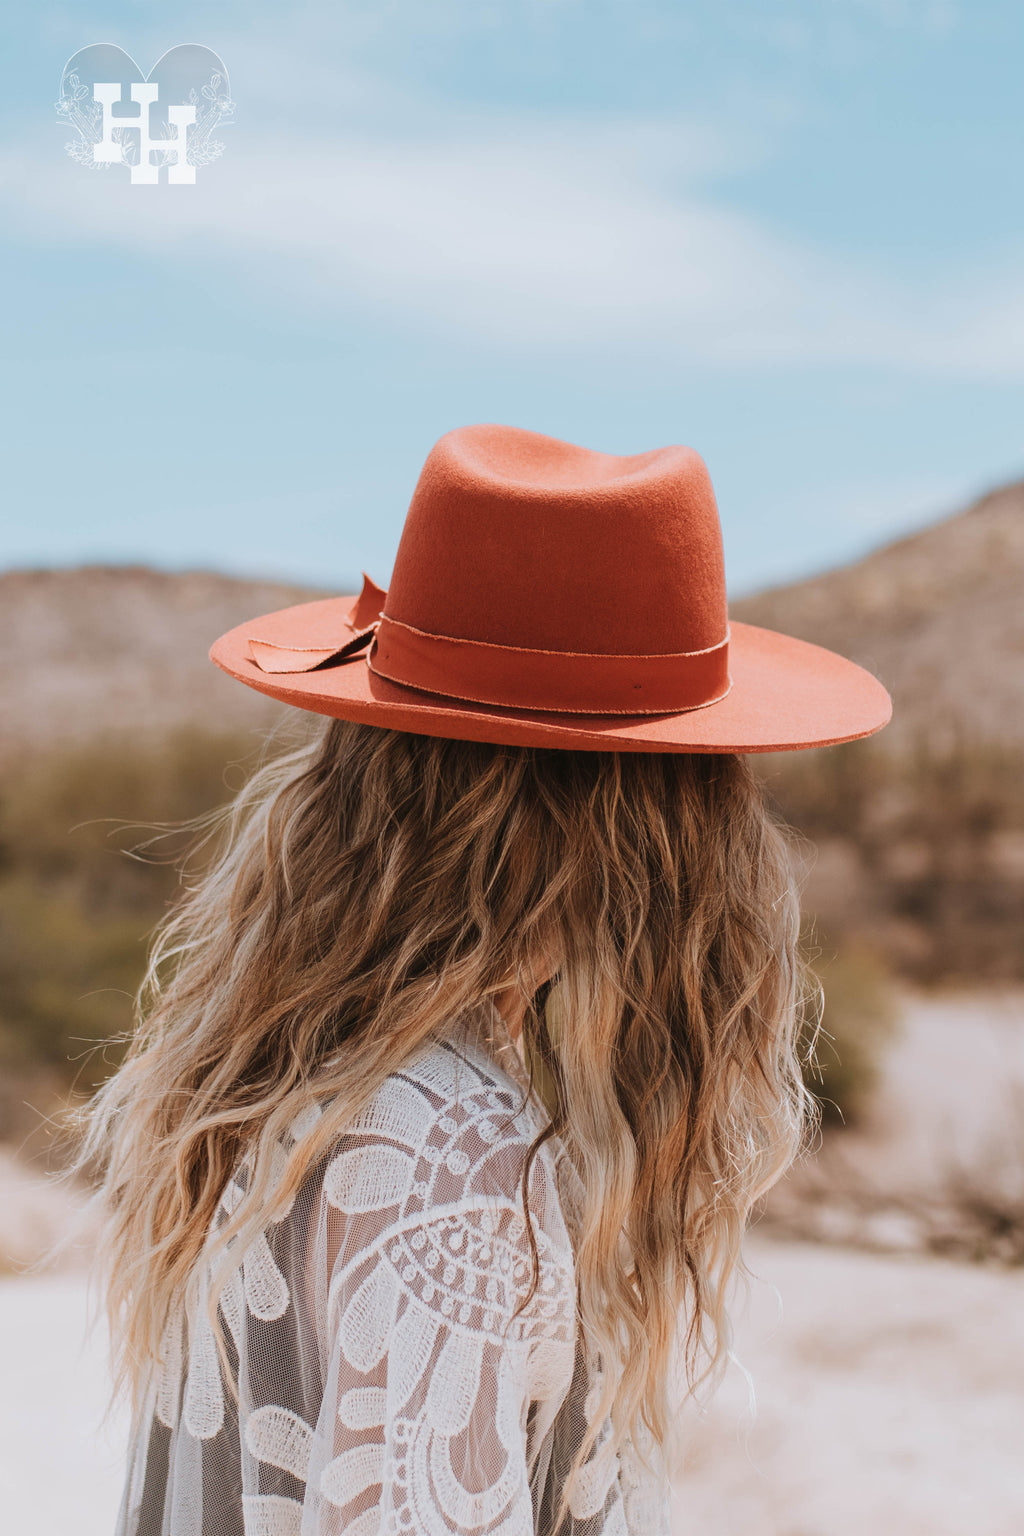 Back view of girl wearing burnt orange colored felt wide brim hat. Hat has as a unfished edged ribbon in the same color tyed around it. Girl is also wearing a lace duster.